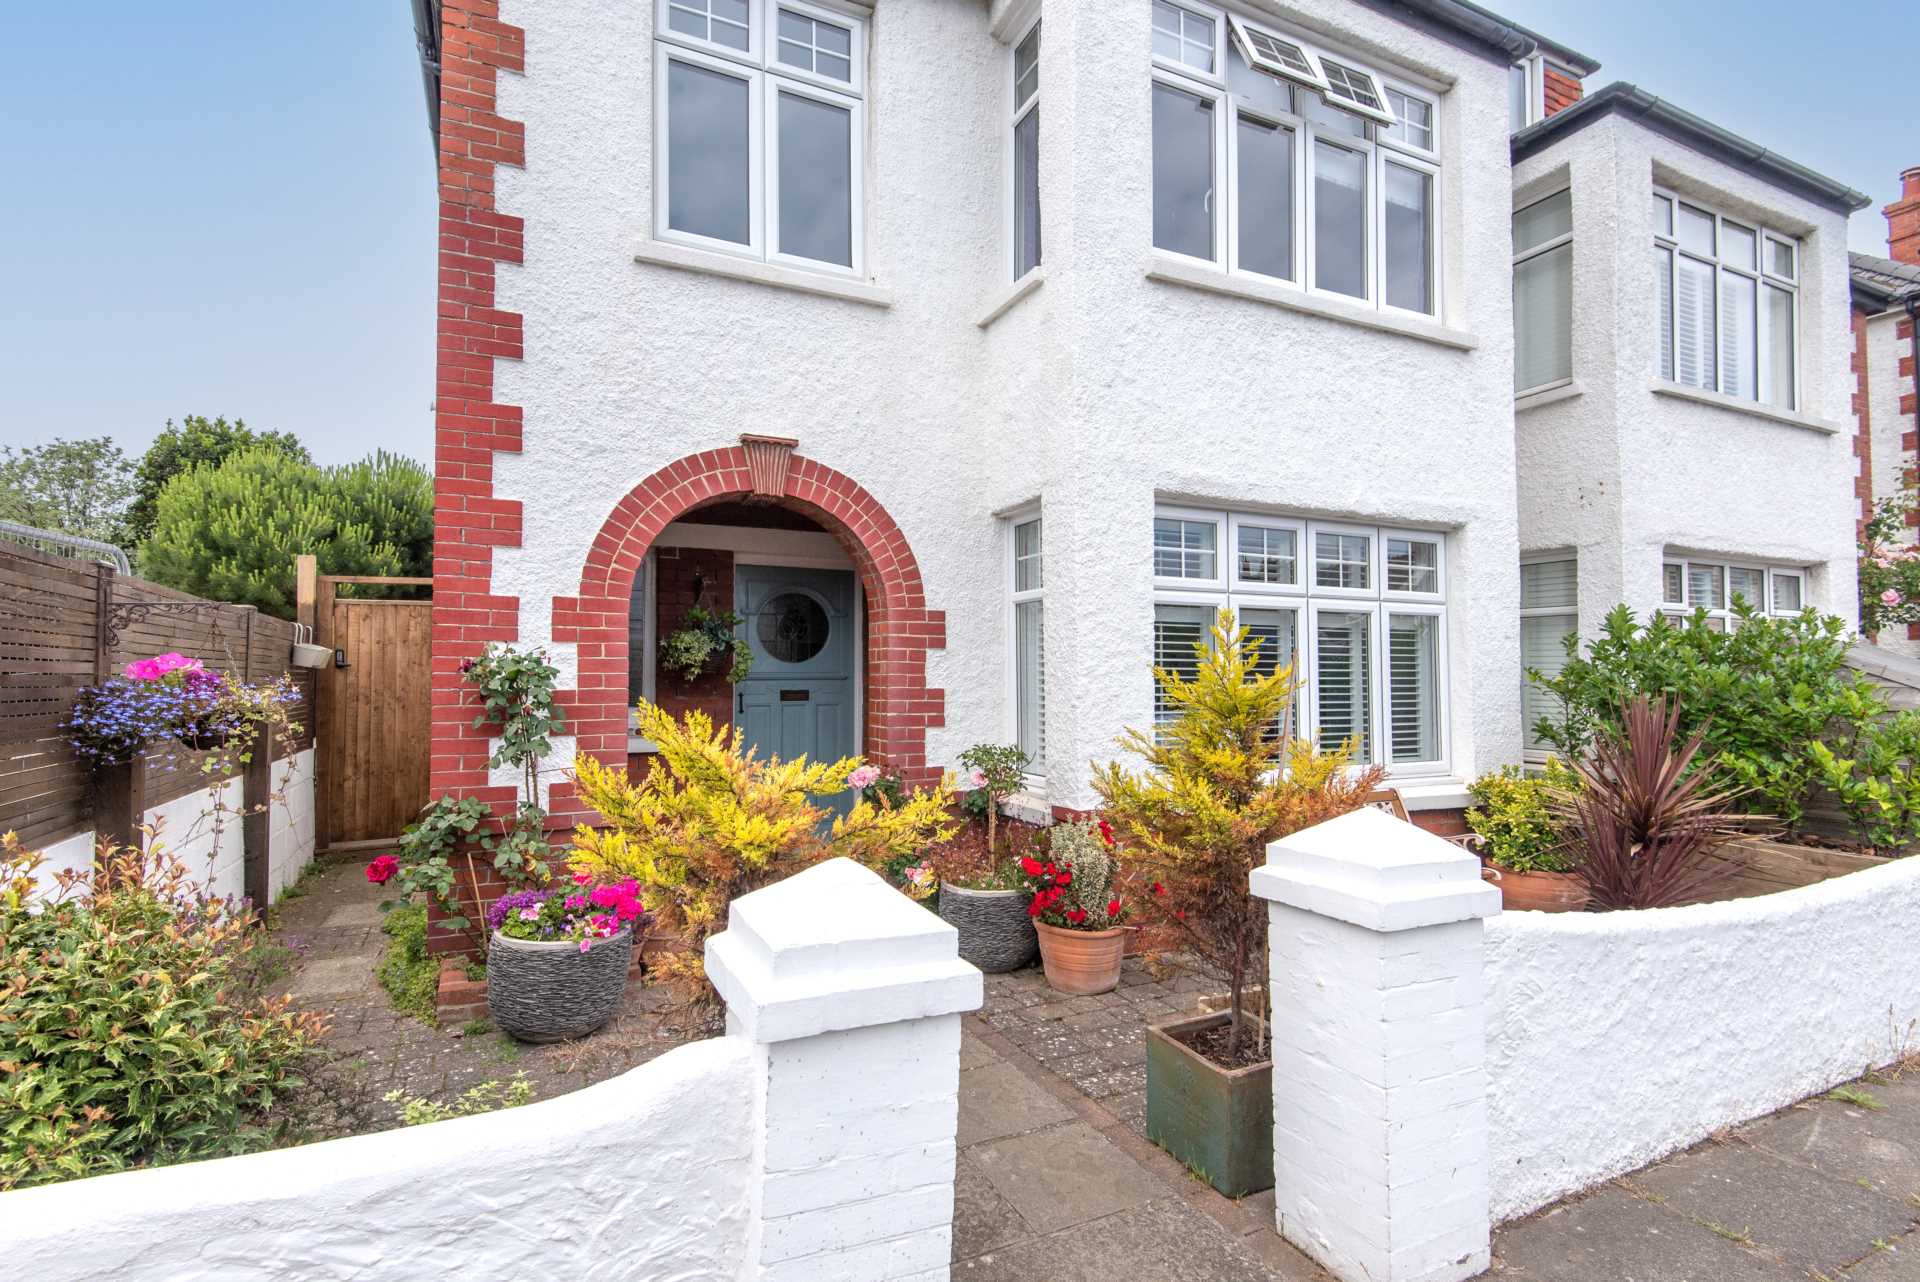 Three Bedroom Family House just 4 Minute walk to the Beach, Image 29